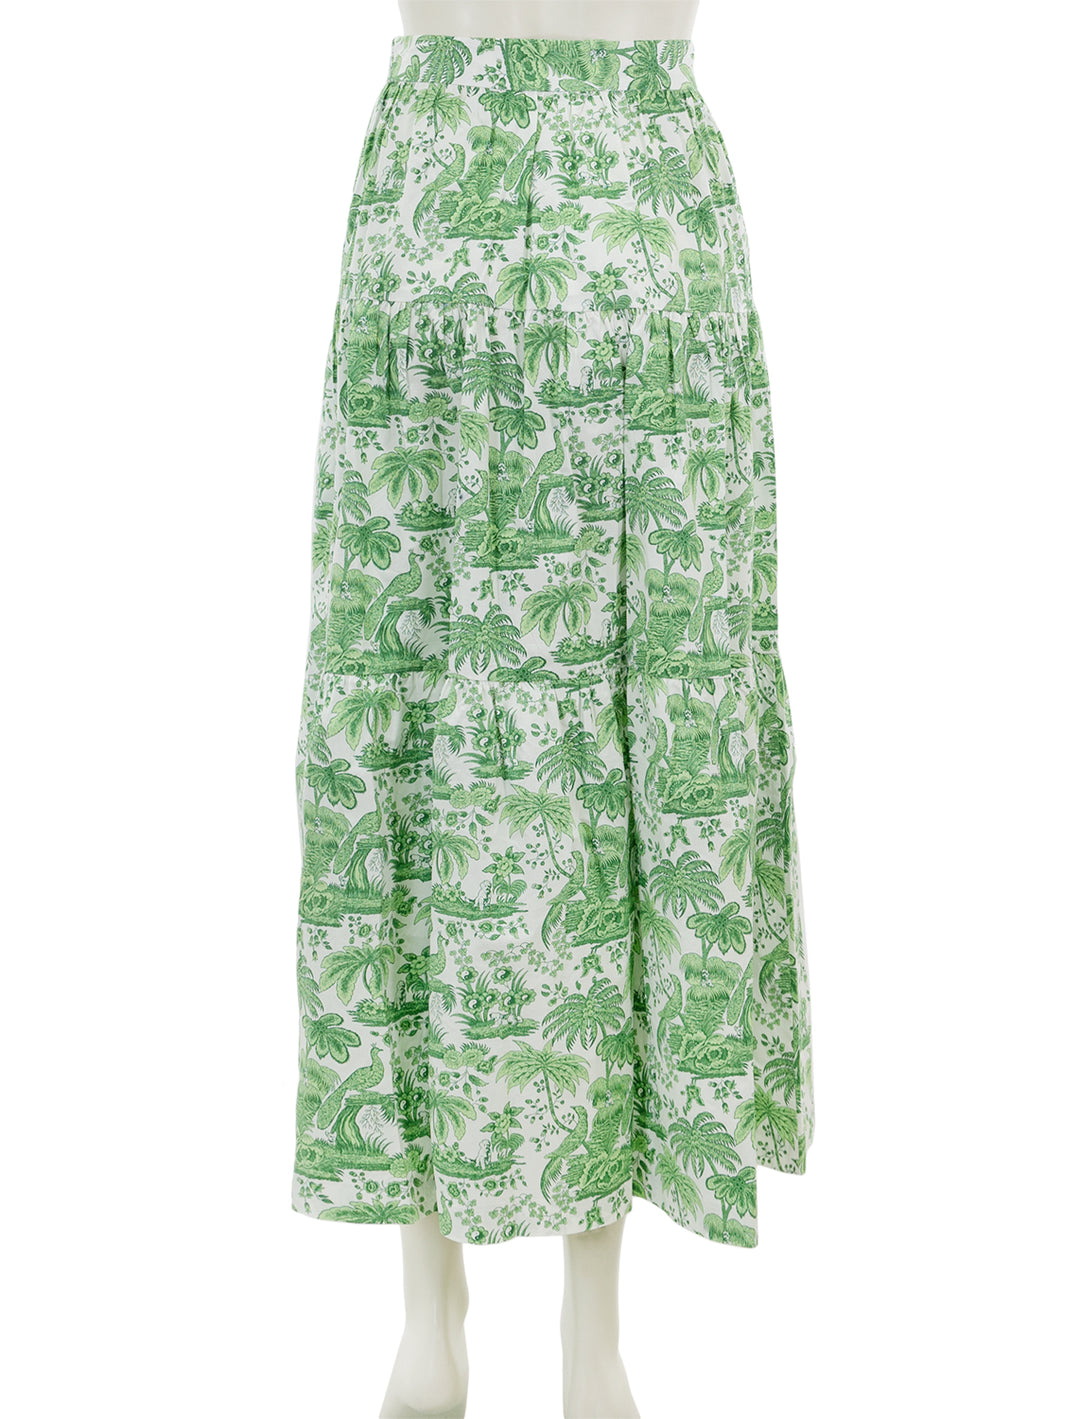 Back view of STAUD's sea skirt in clover toile.